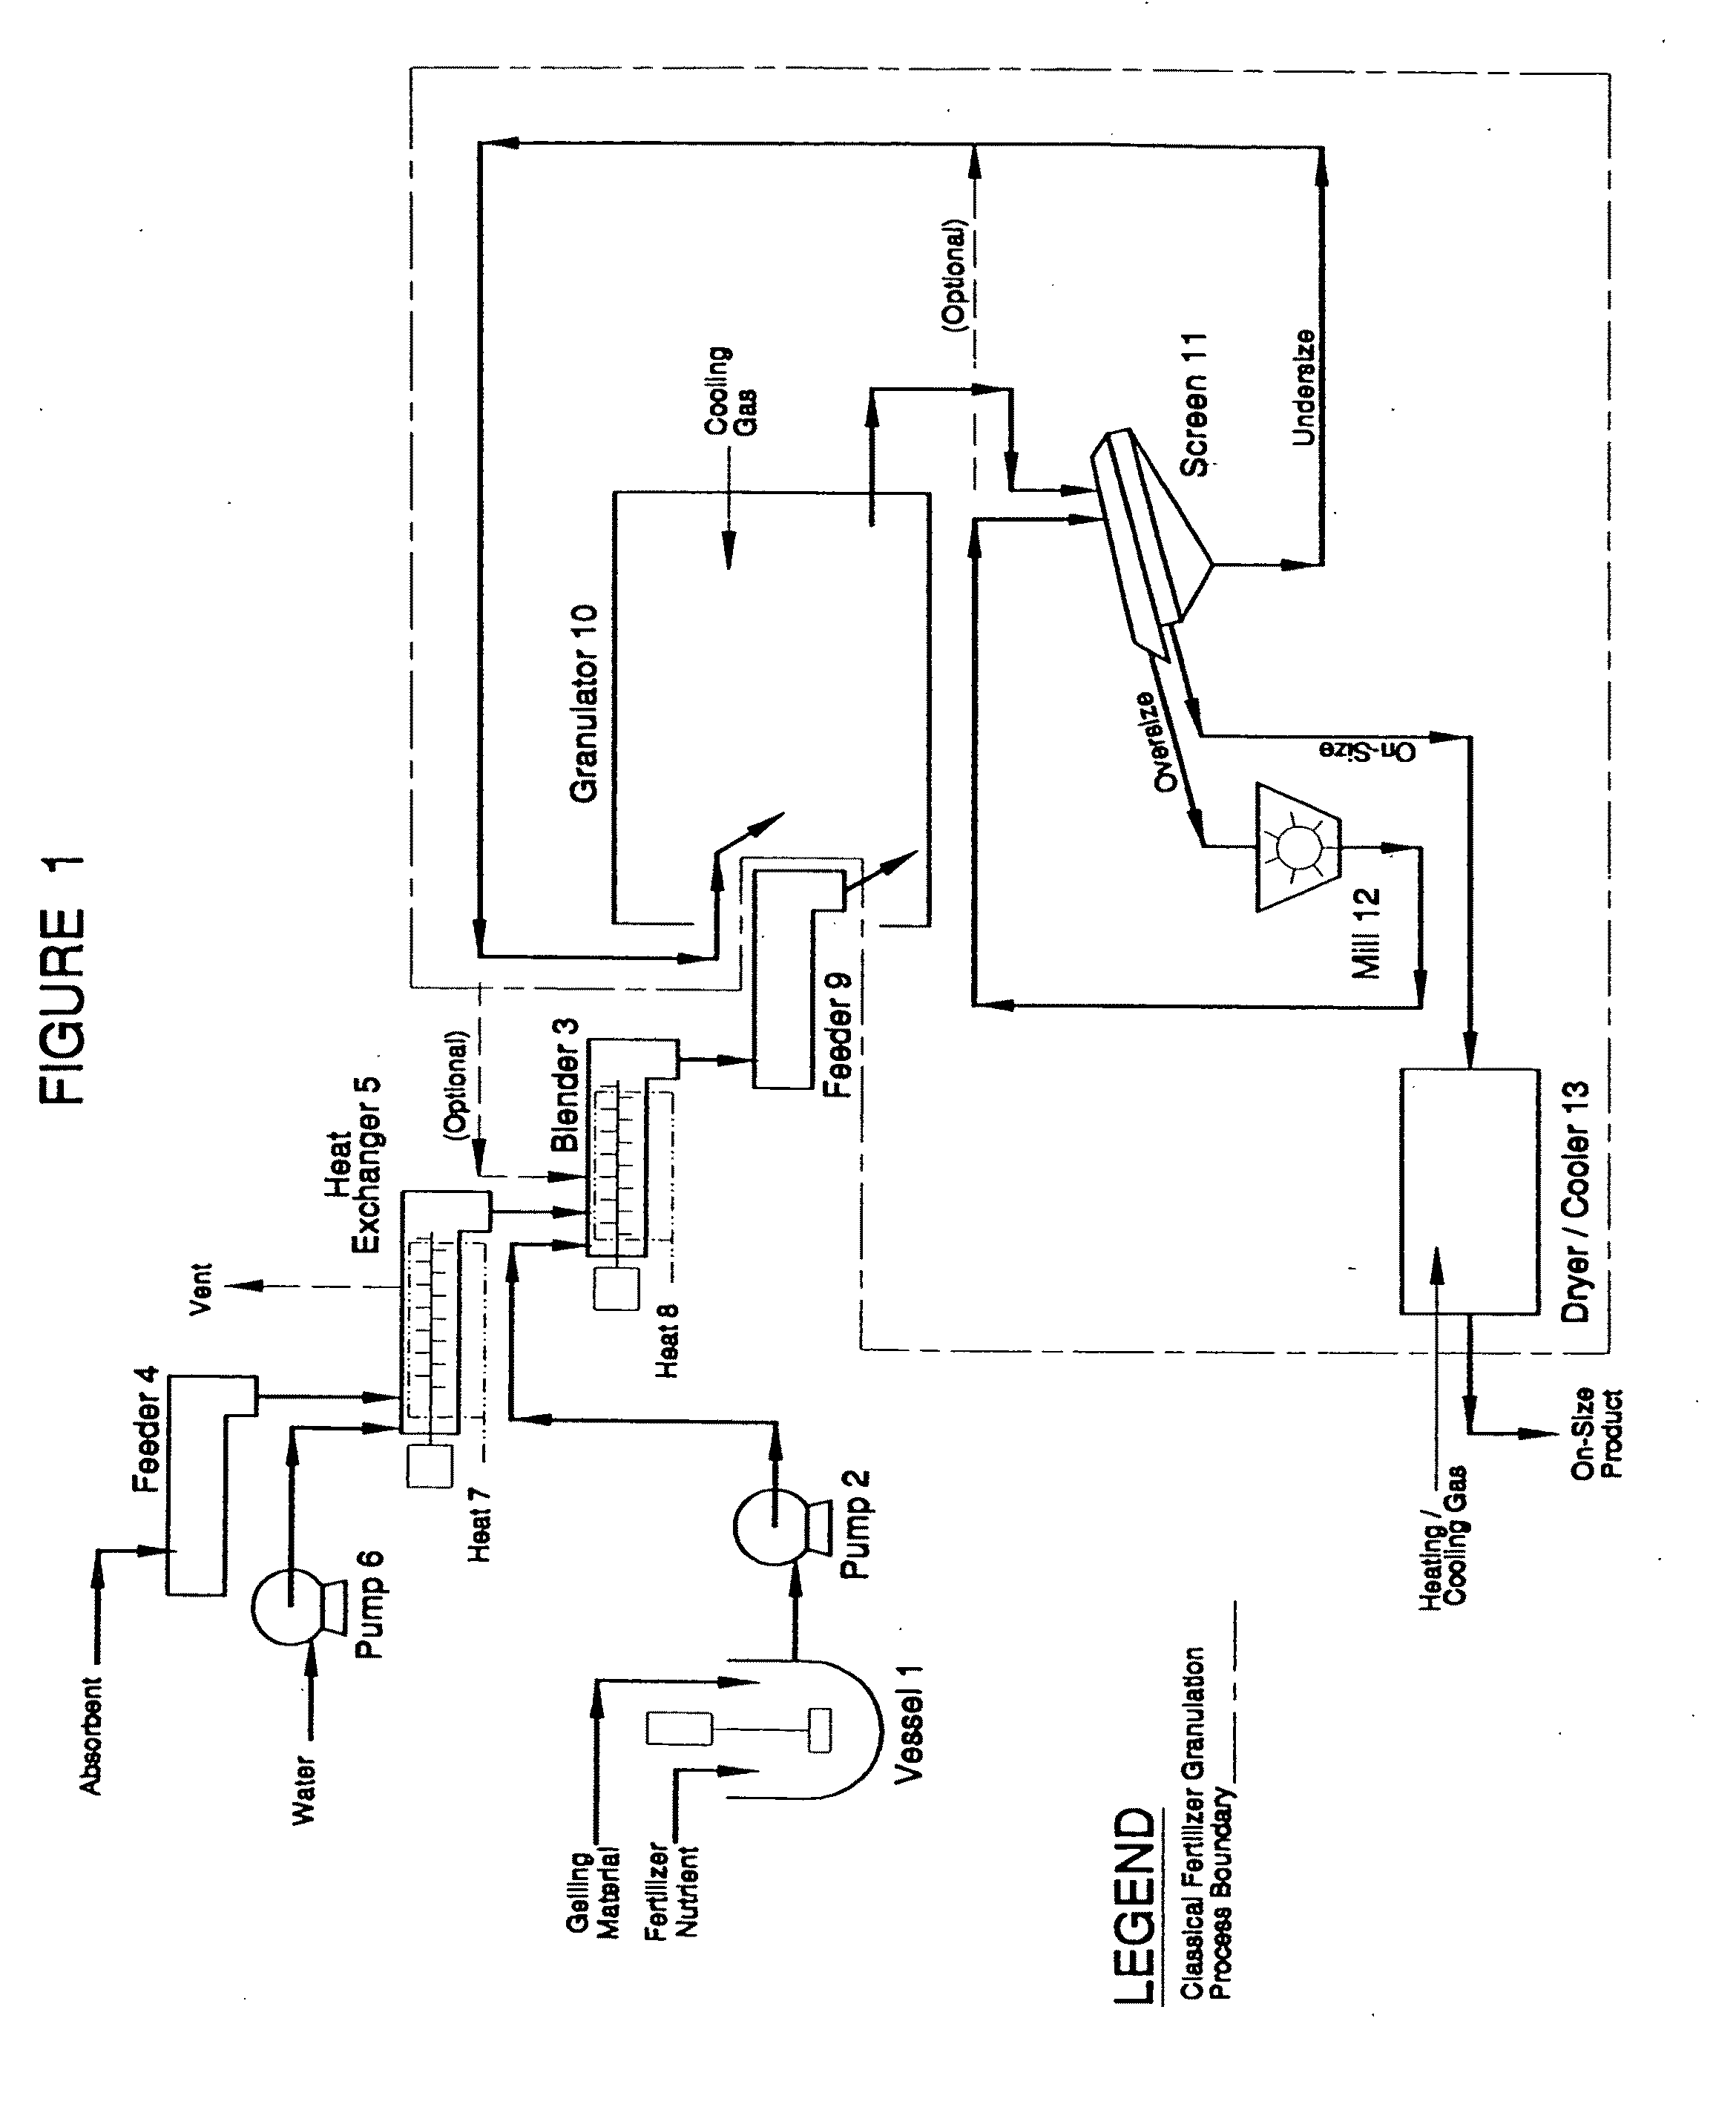 Controlled release fertilizers containing calcium sulfate and processes for making same